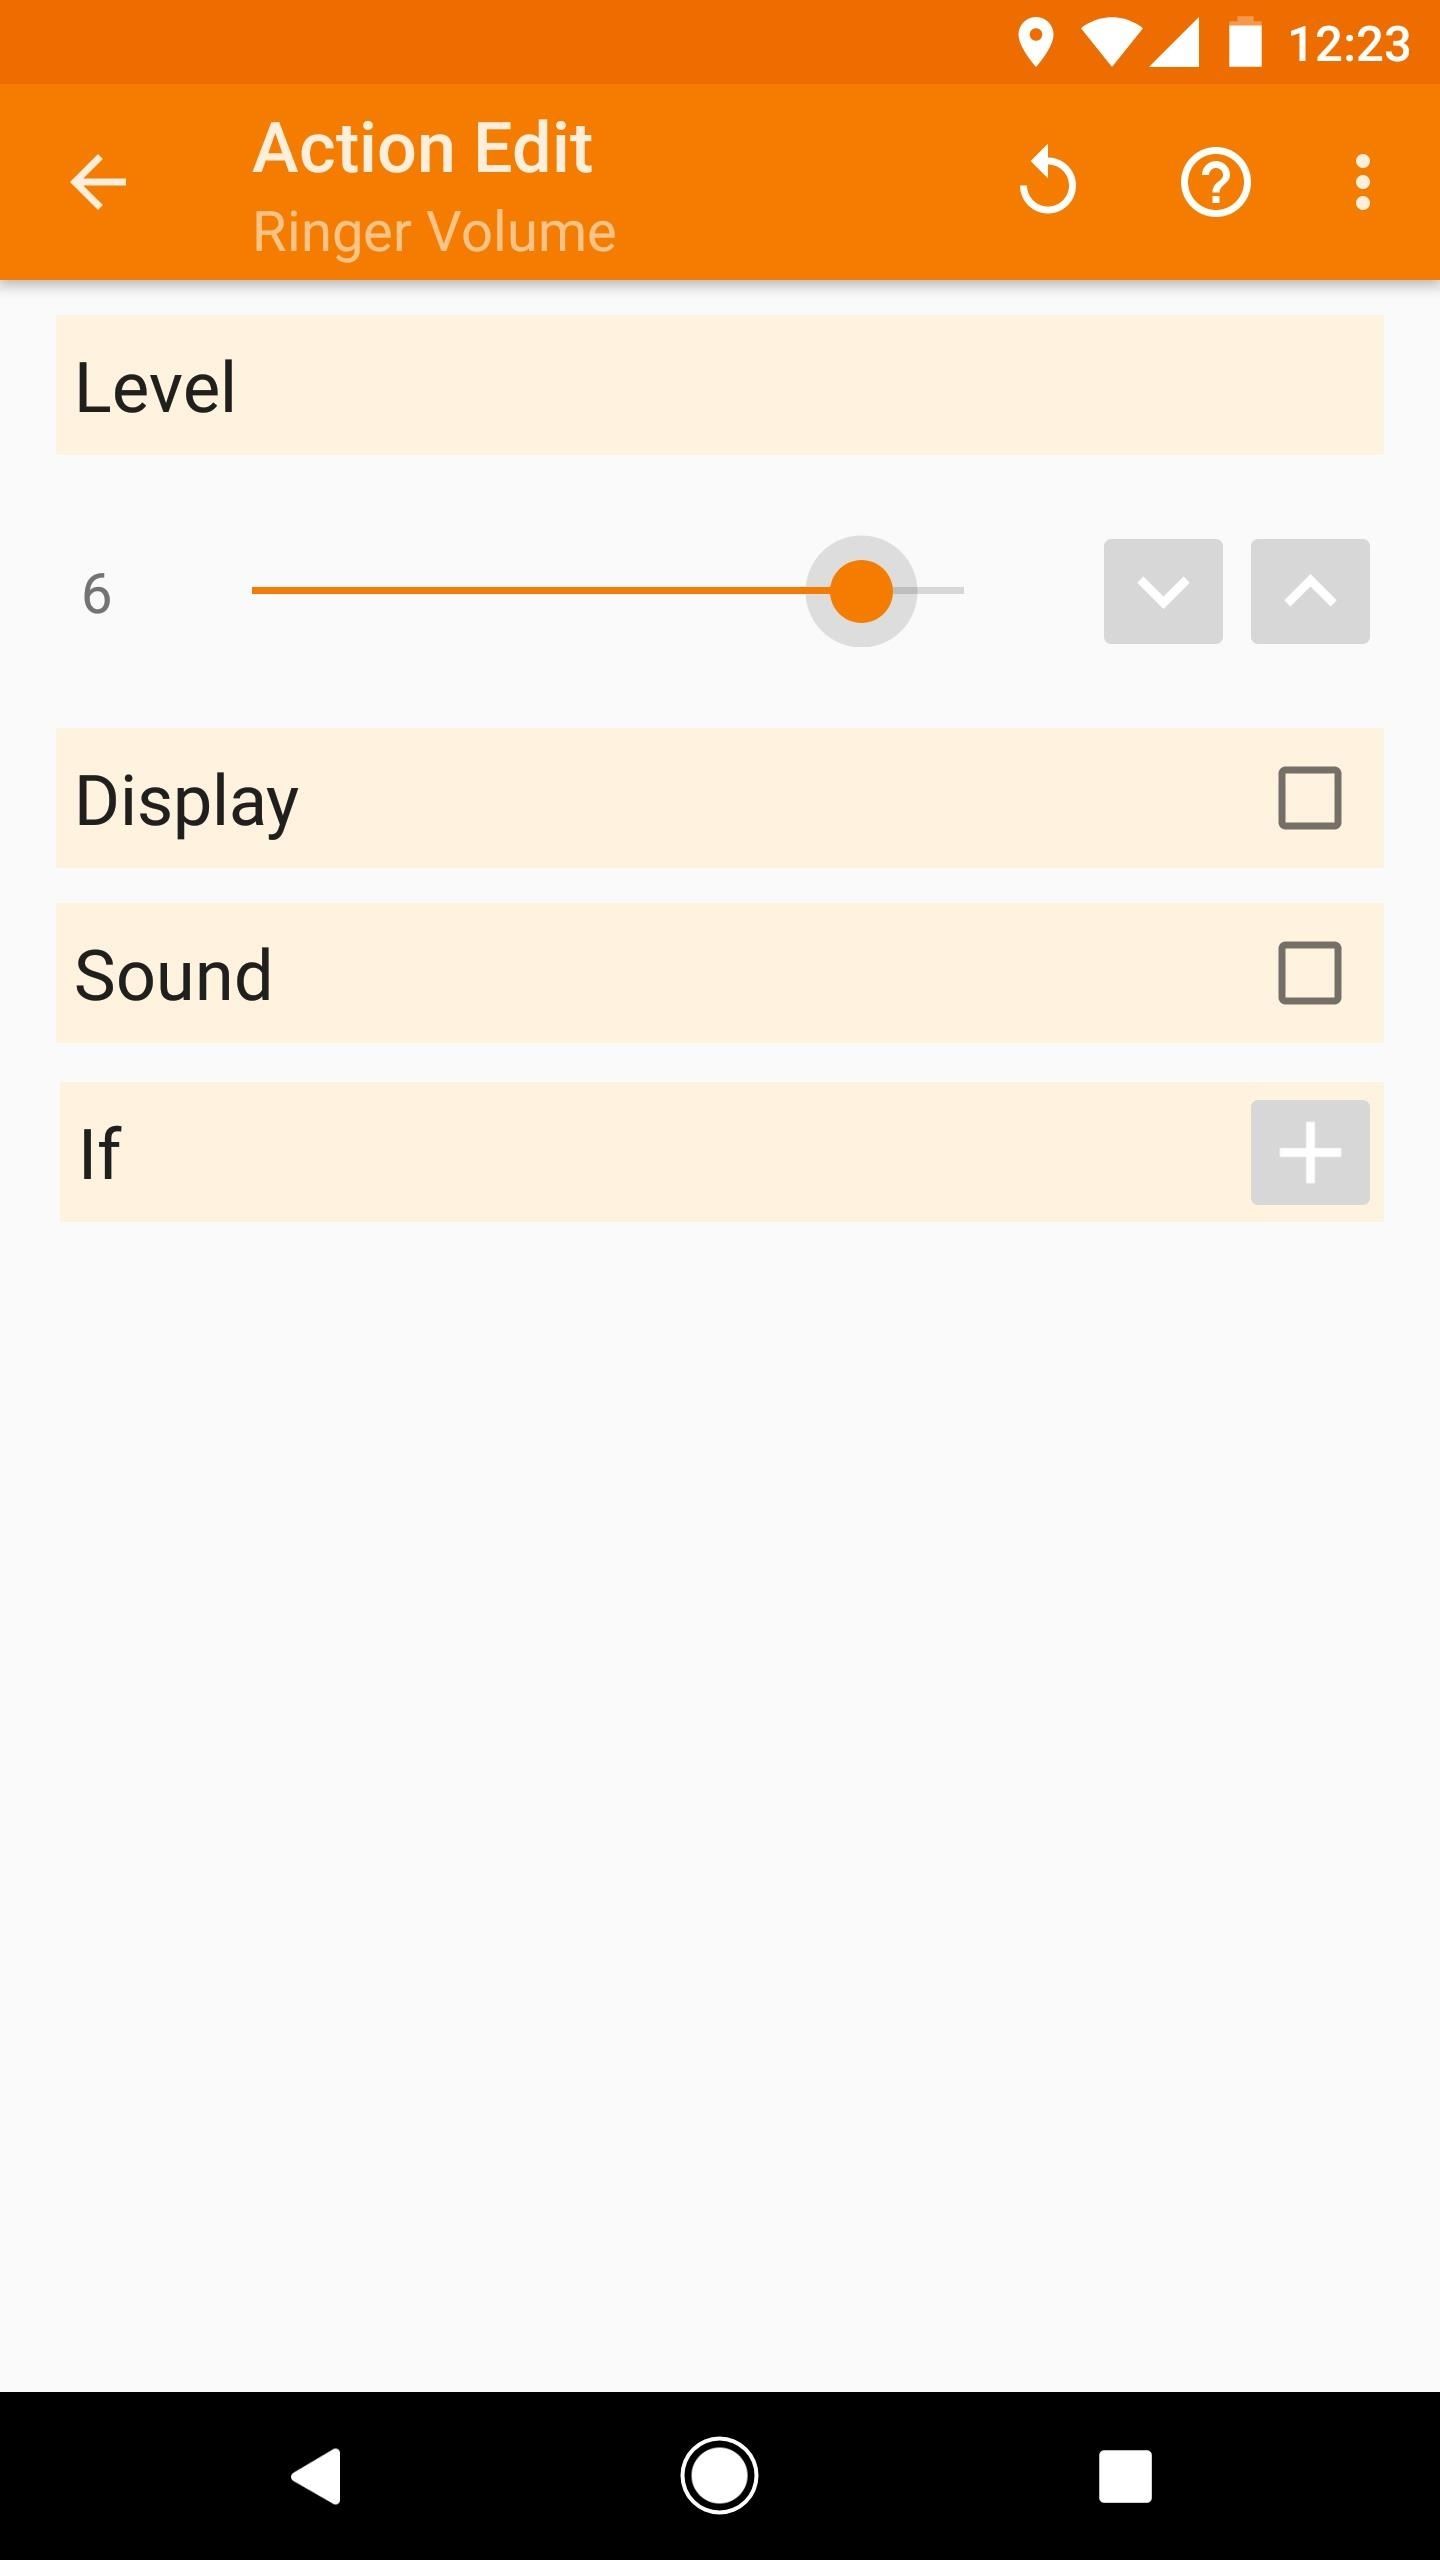 Tasker 101: 5 Useful Profiles to Help Get You Started with Android Automation